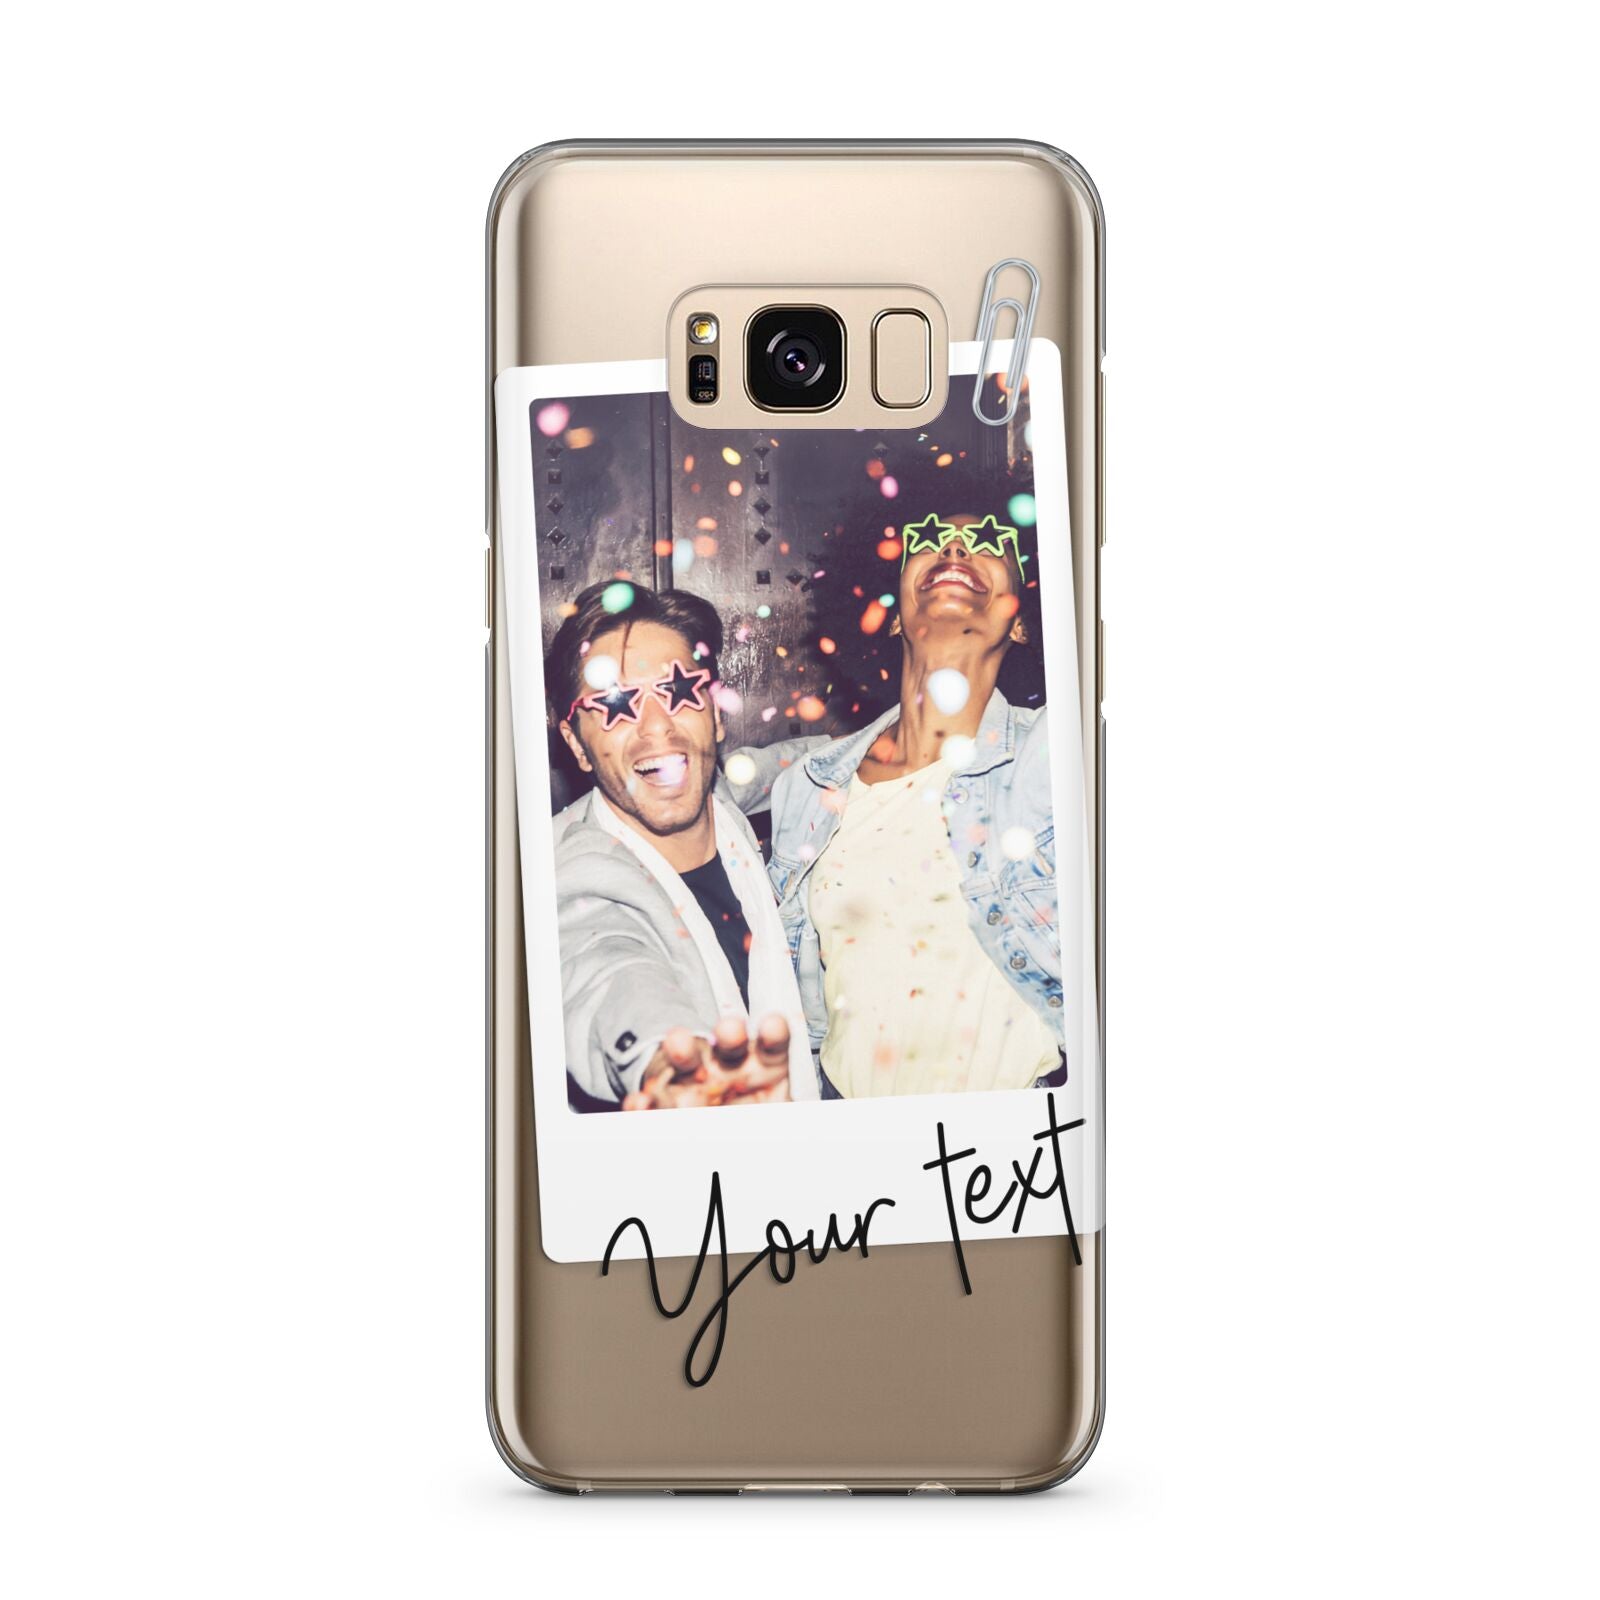 Personalised Photo with Text Samsung Galaxy S8 Plus Case